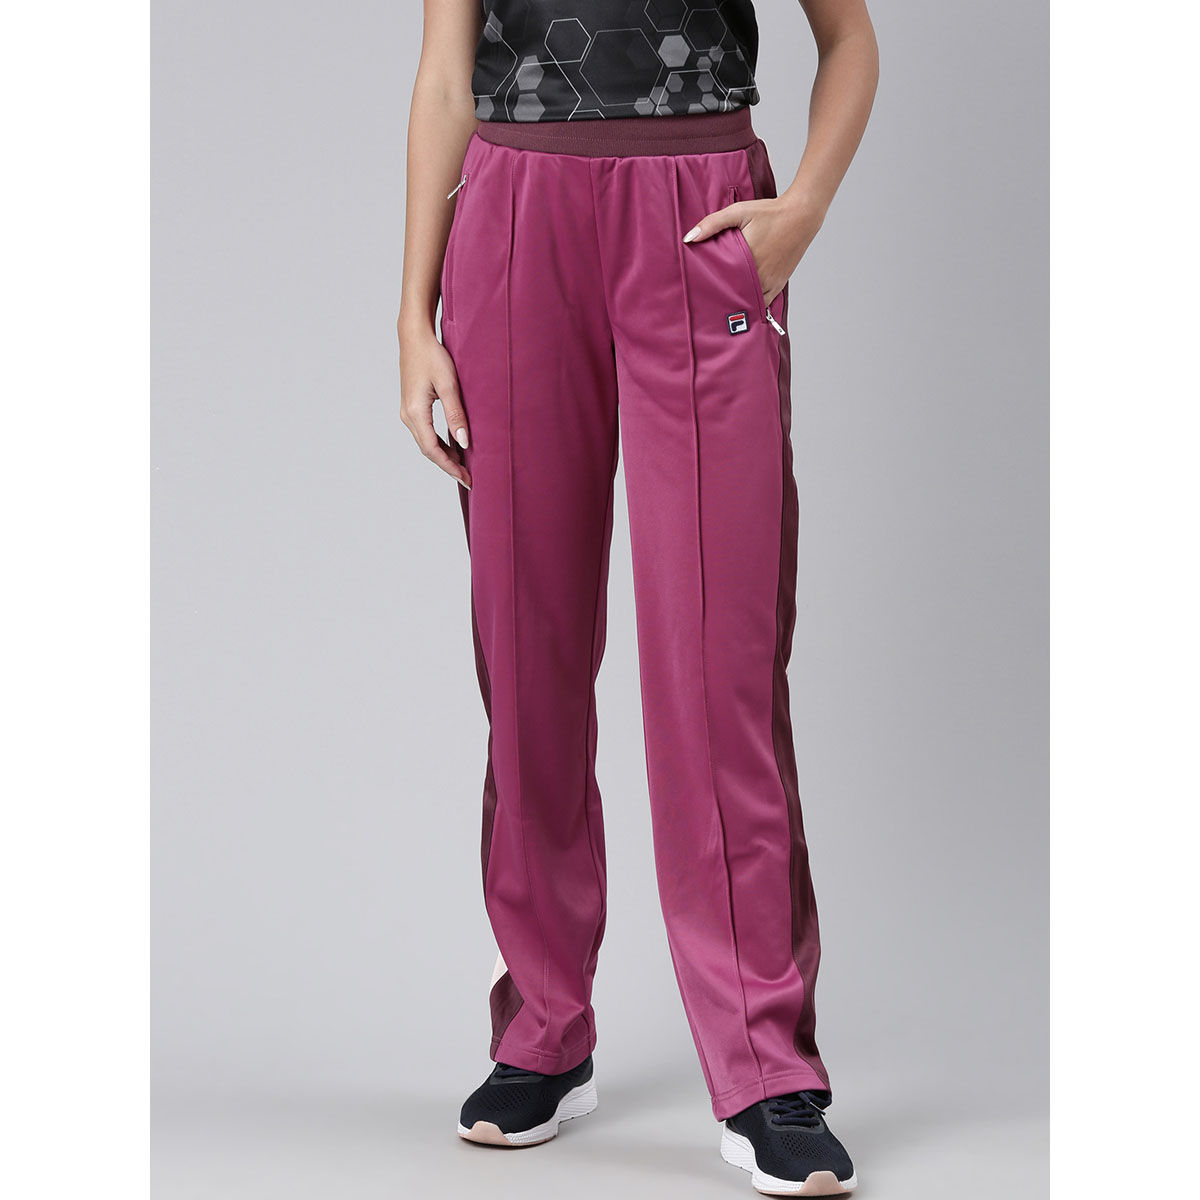 Buy Fila Track Pants Online In India At Best Price Offers  Tata CLiQ